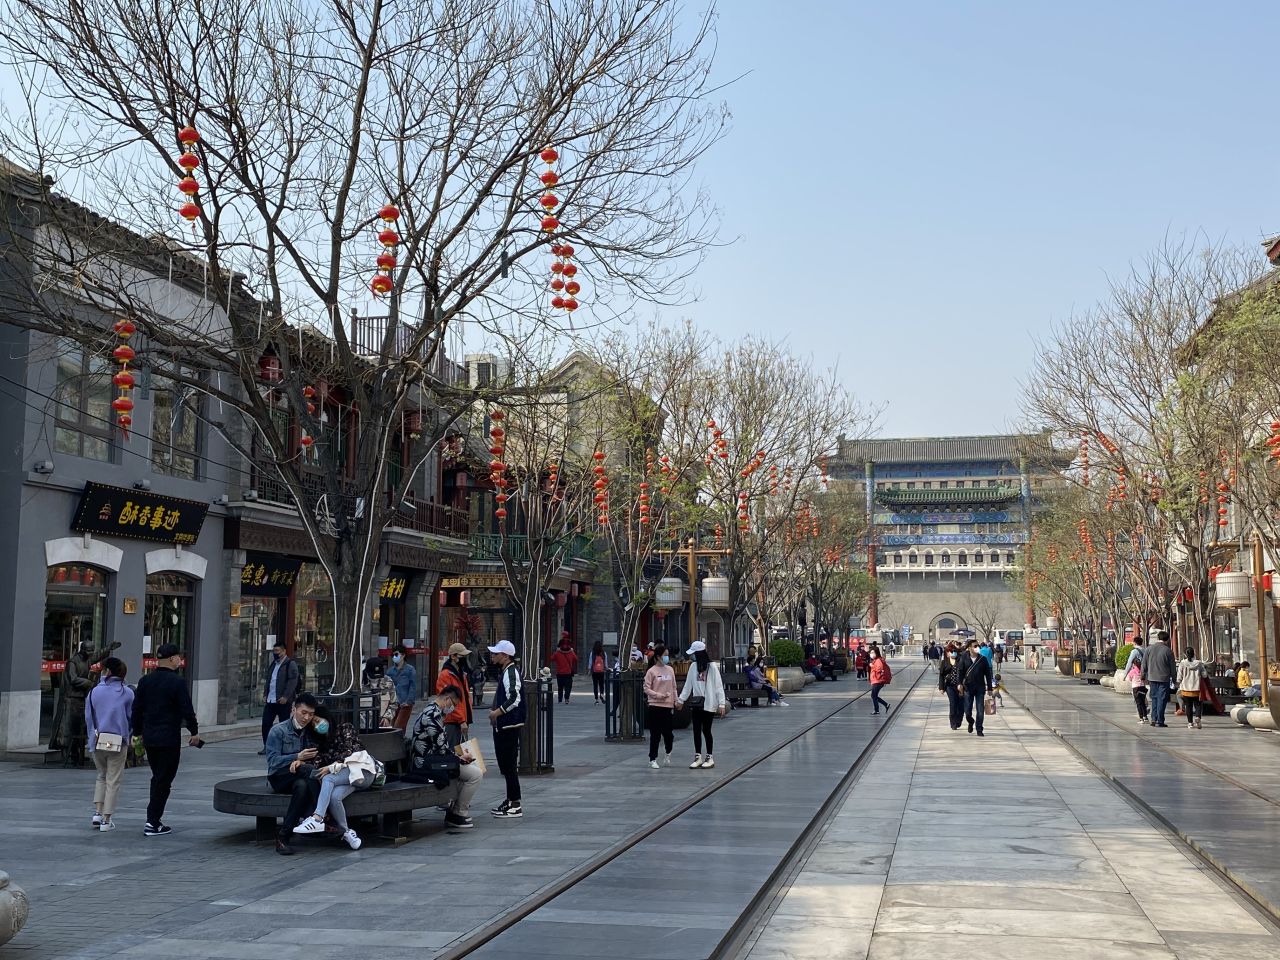 Crowds gather in Beijing to celebrate the Qingming Festival on April 6, after weeks of coronavirus fears.